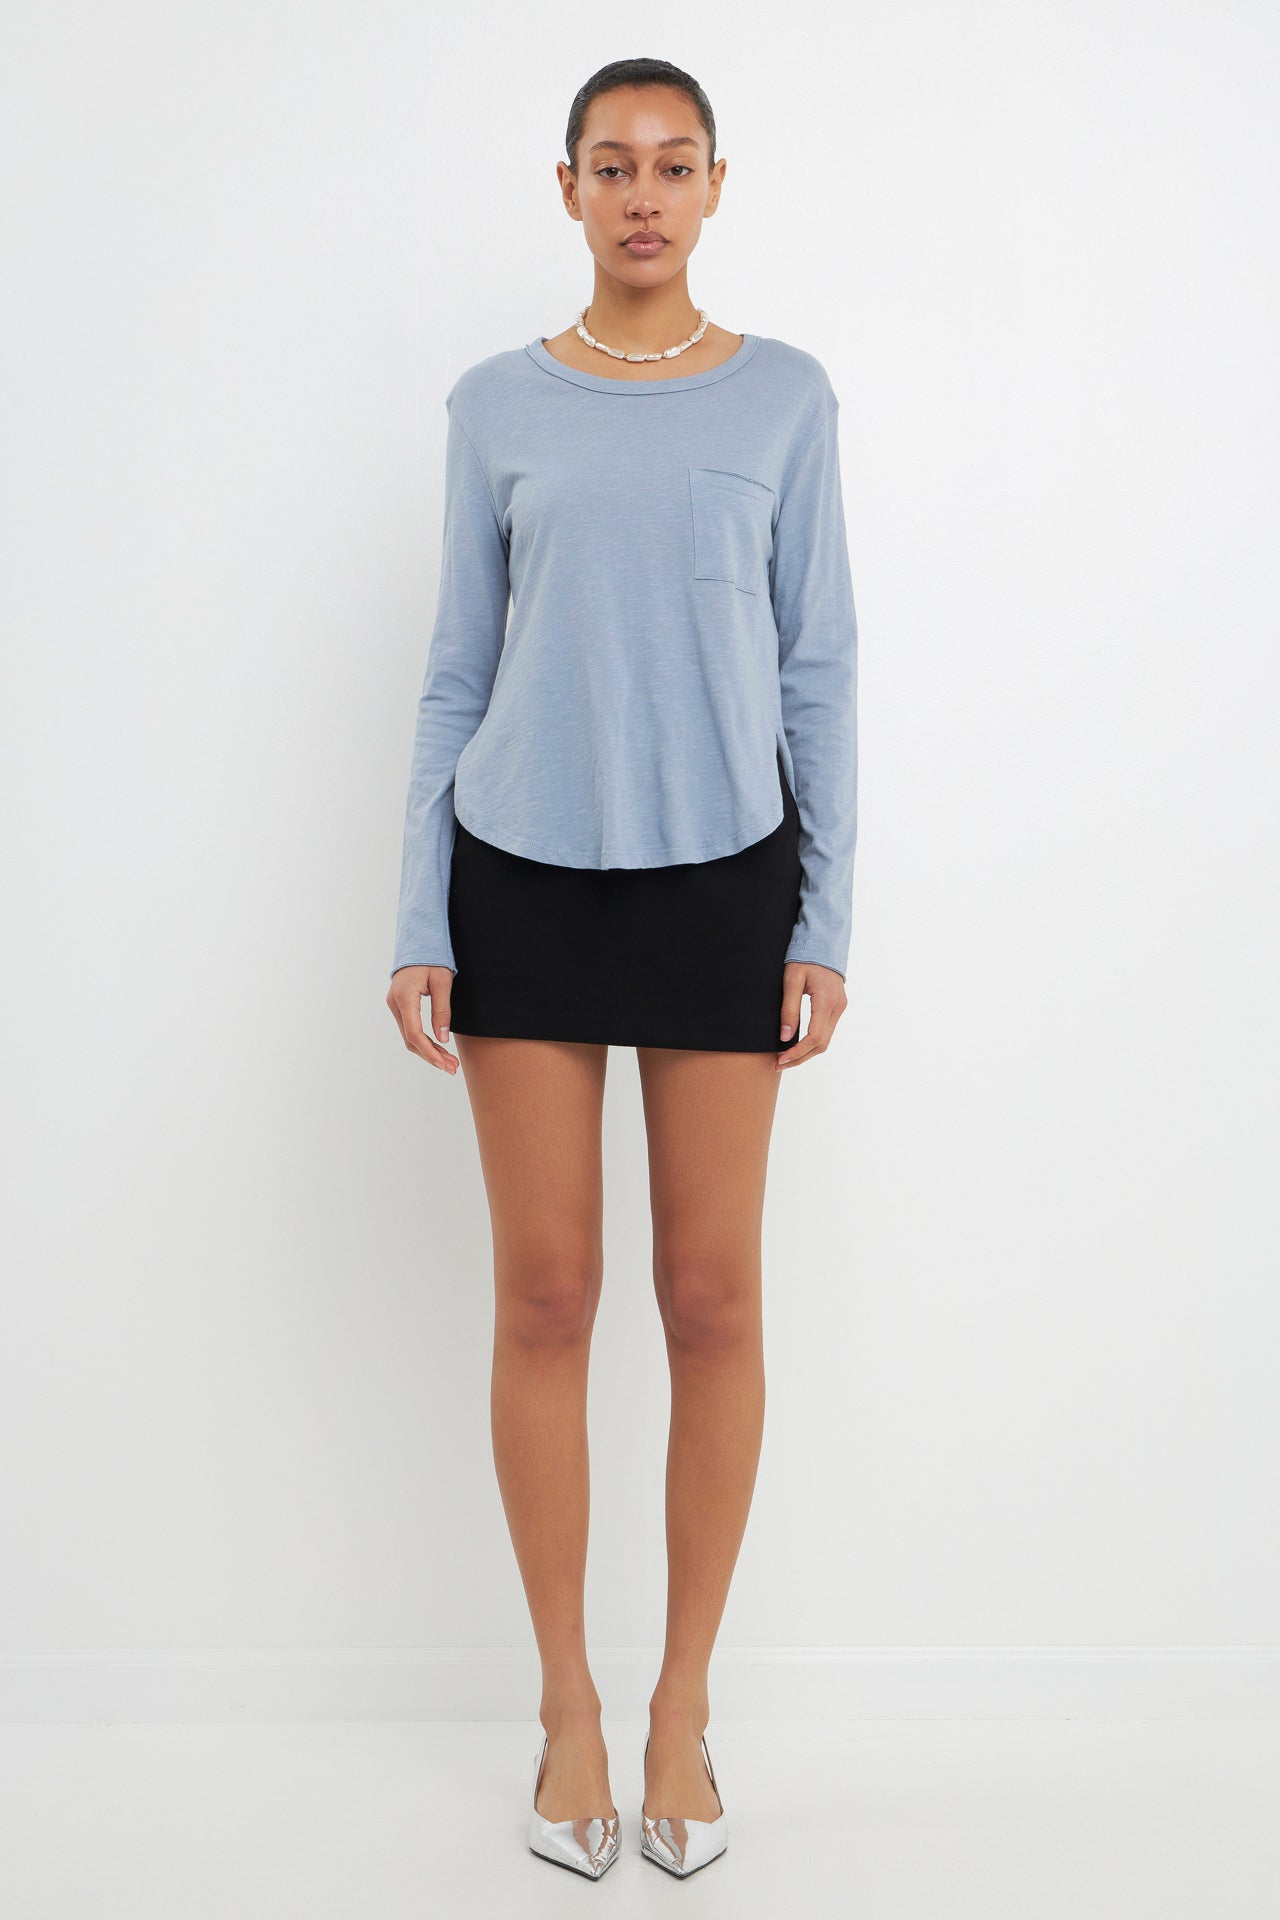 Classic Round Neck Long Sleeves